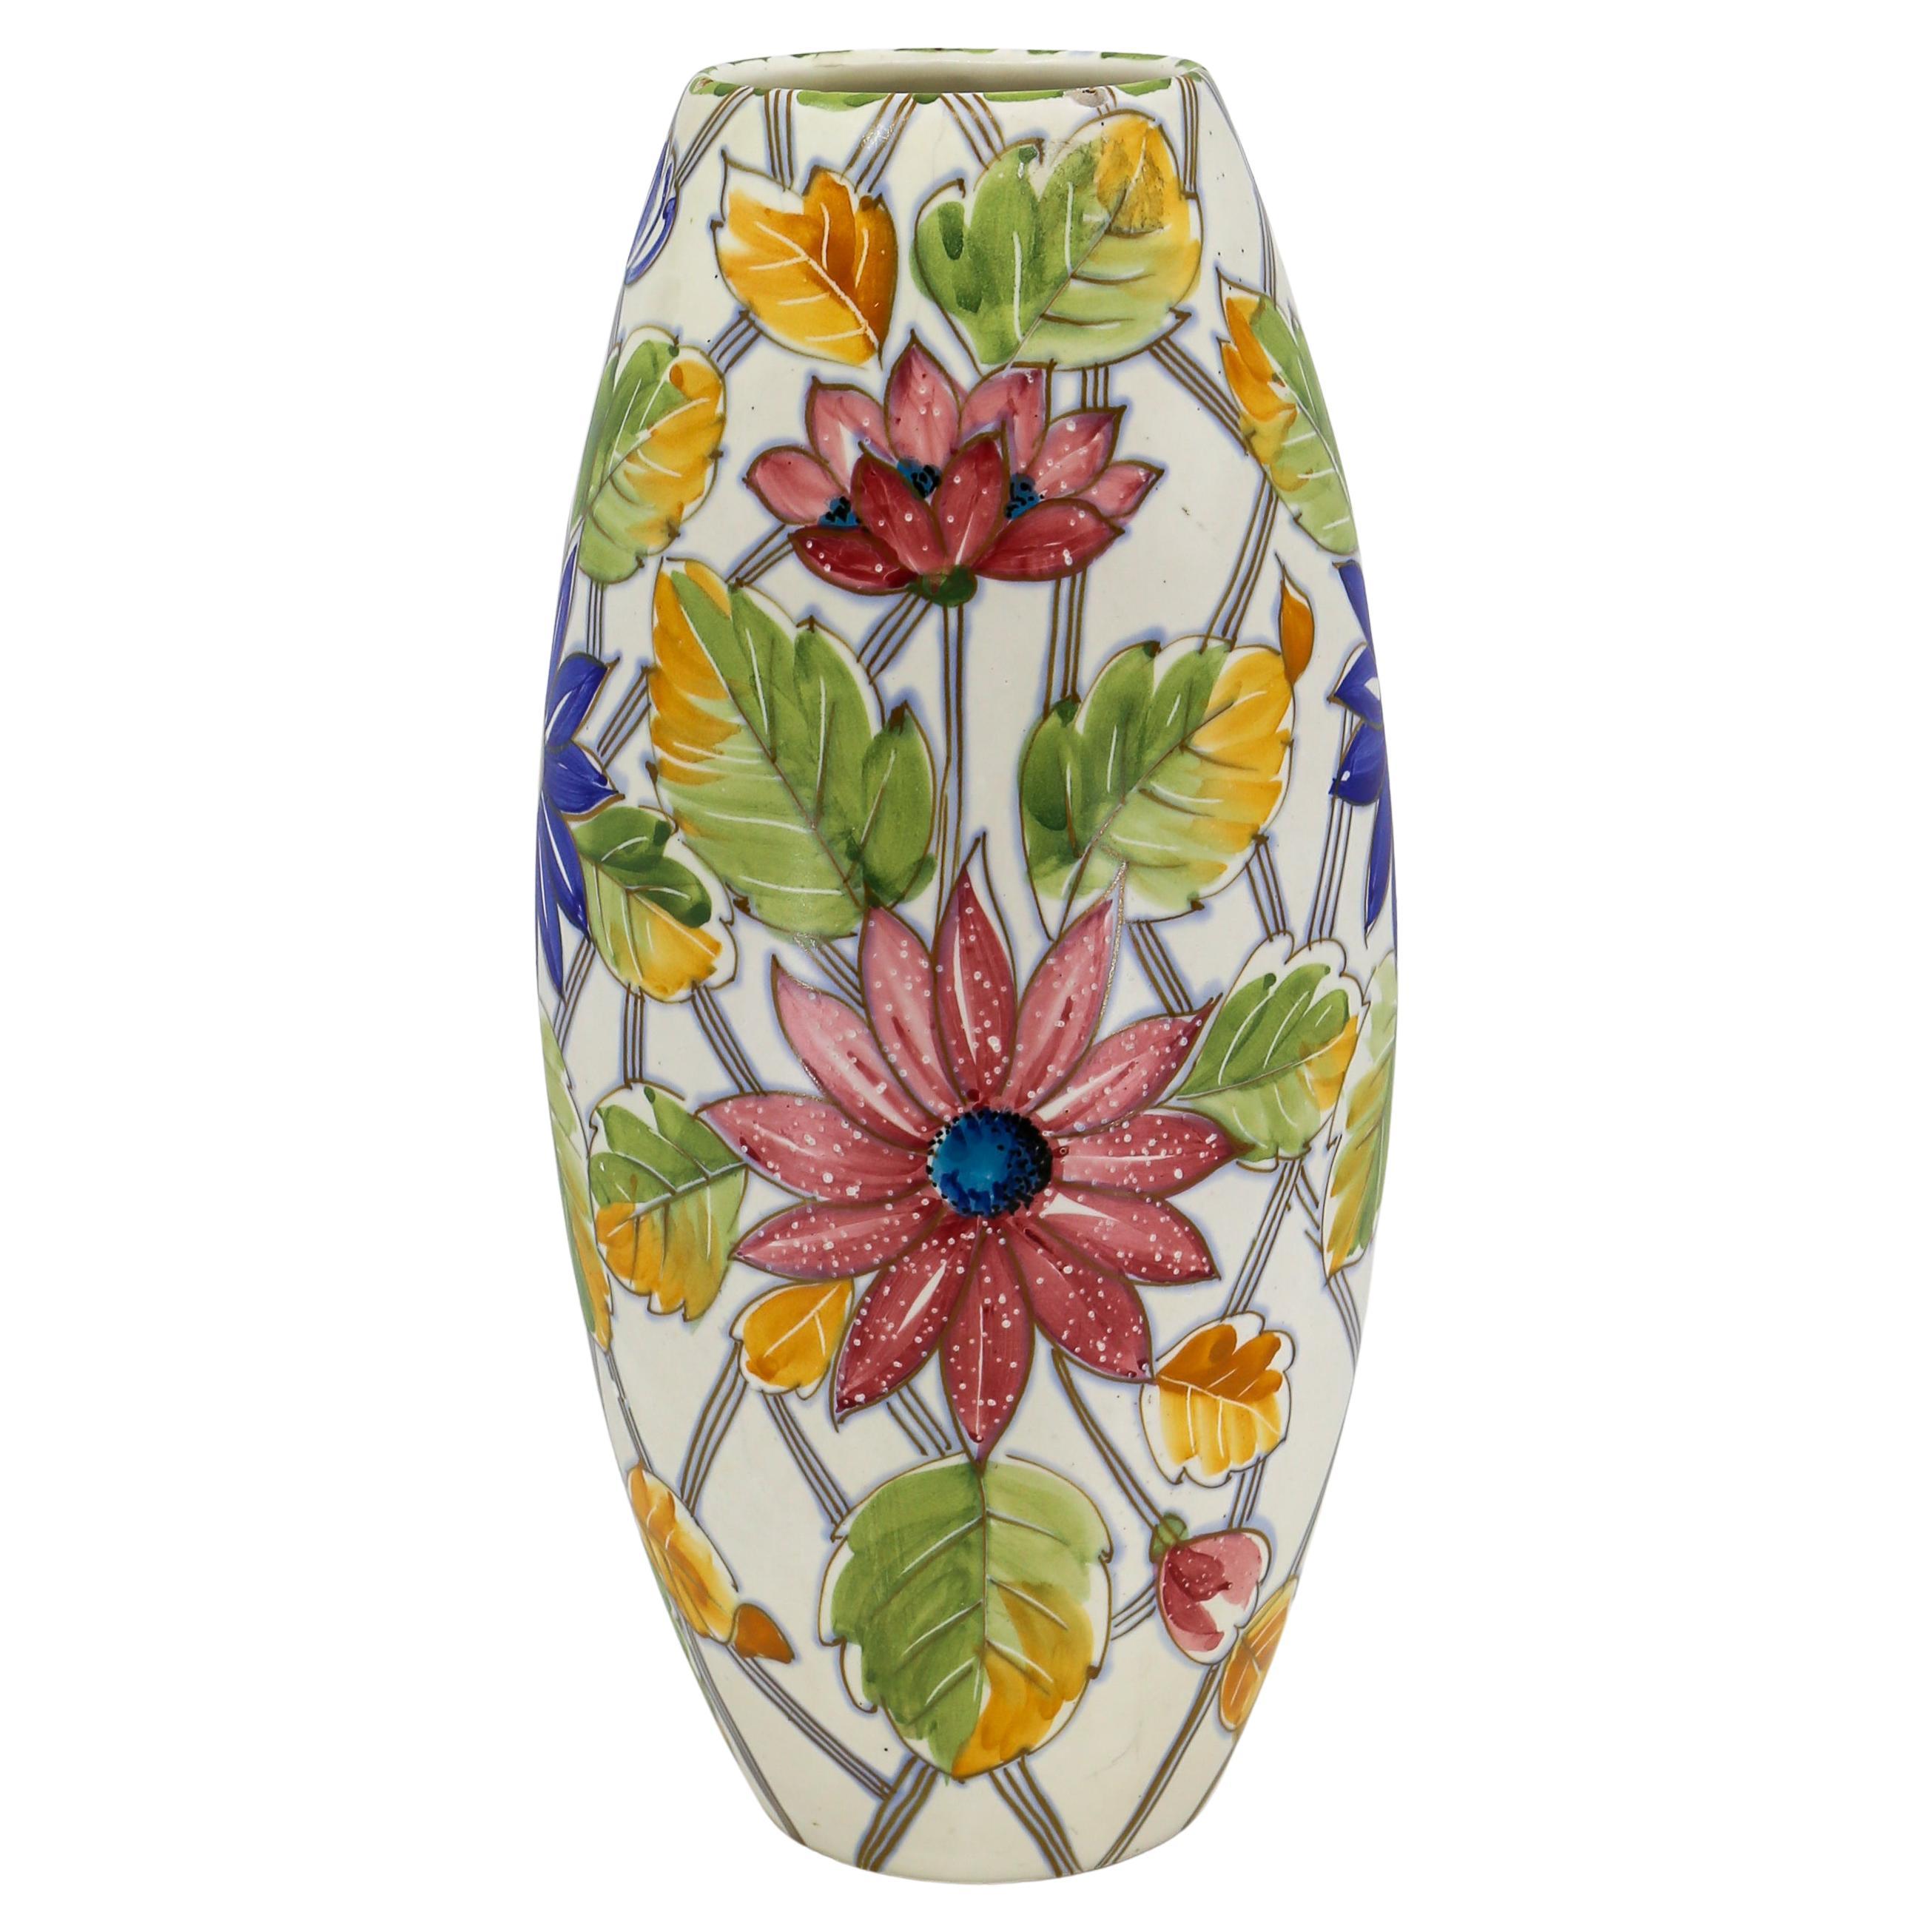 Oval Italian Vase with Floral Motif